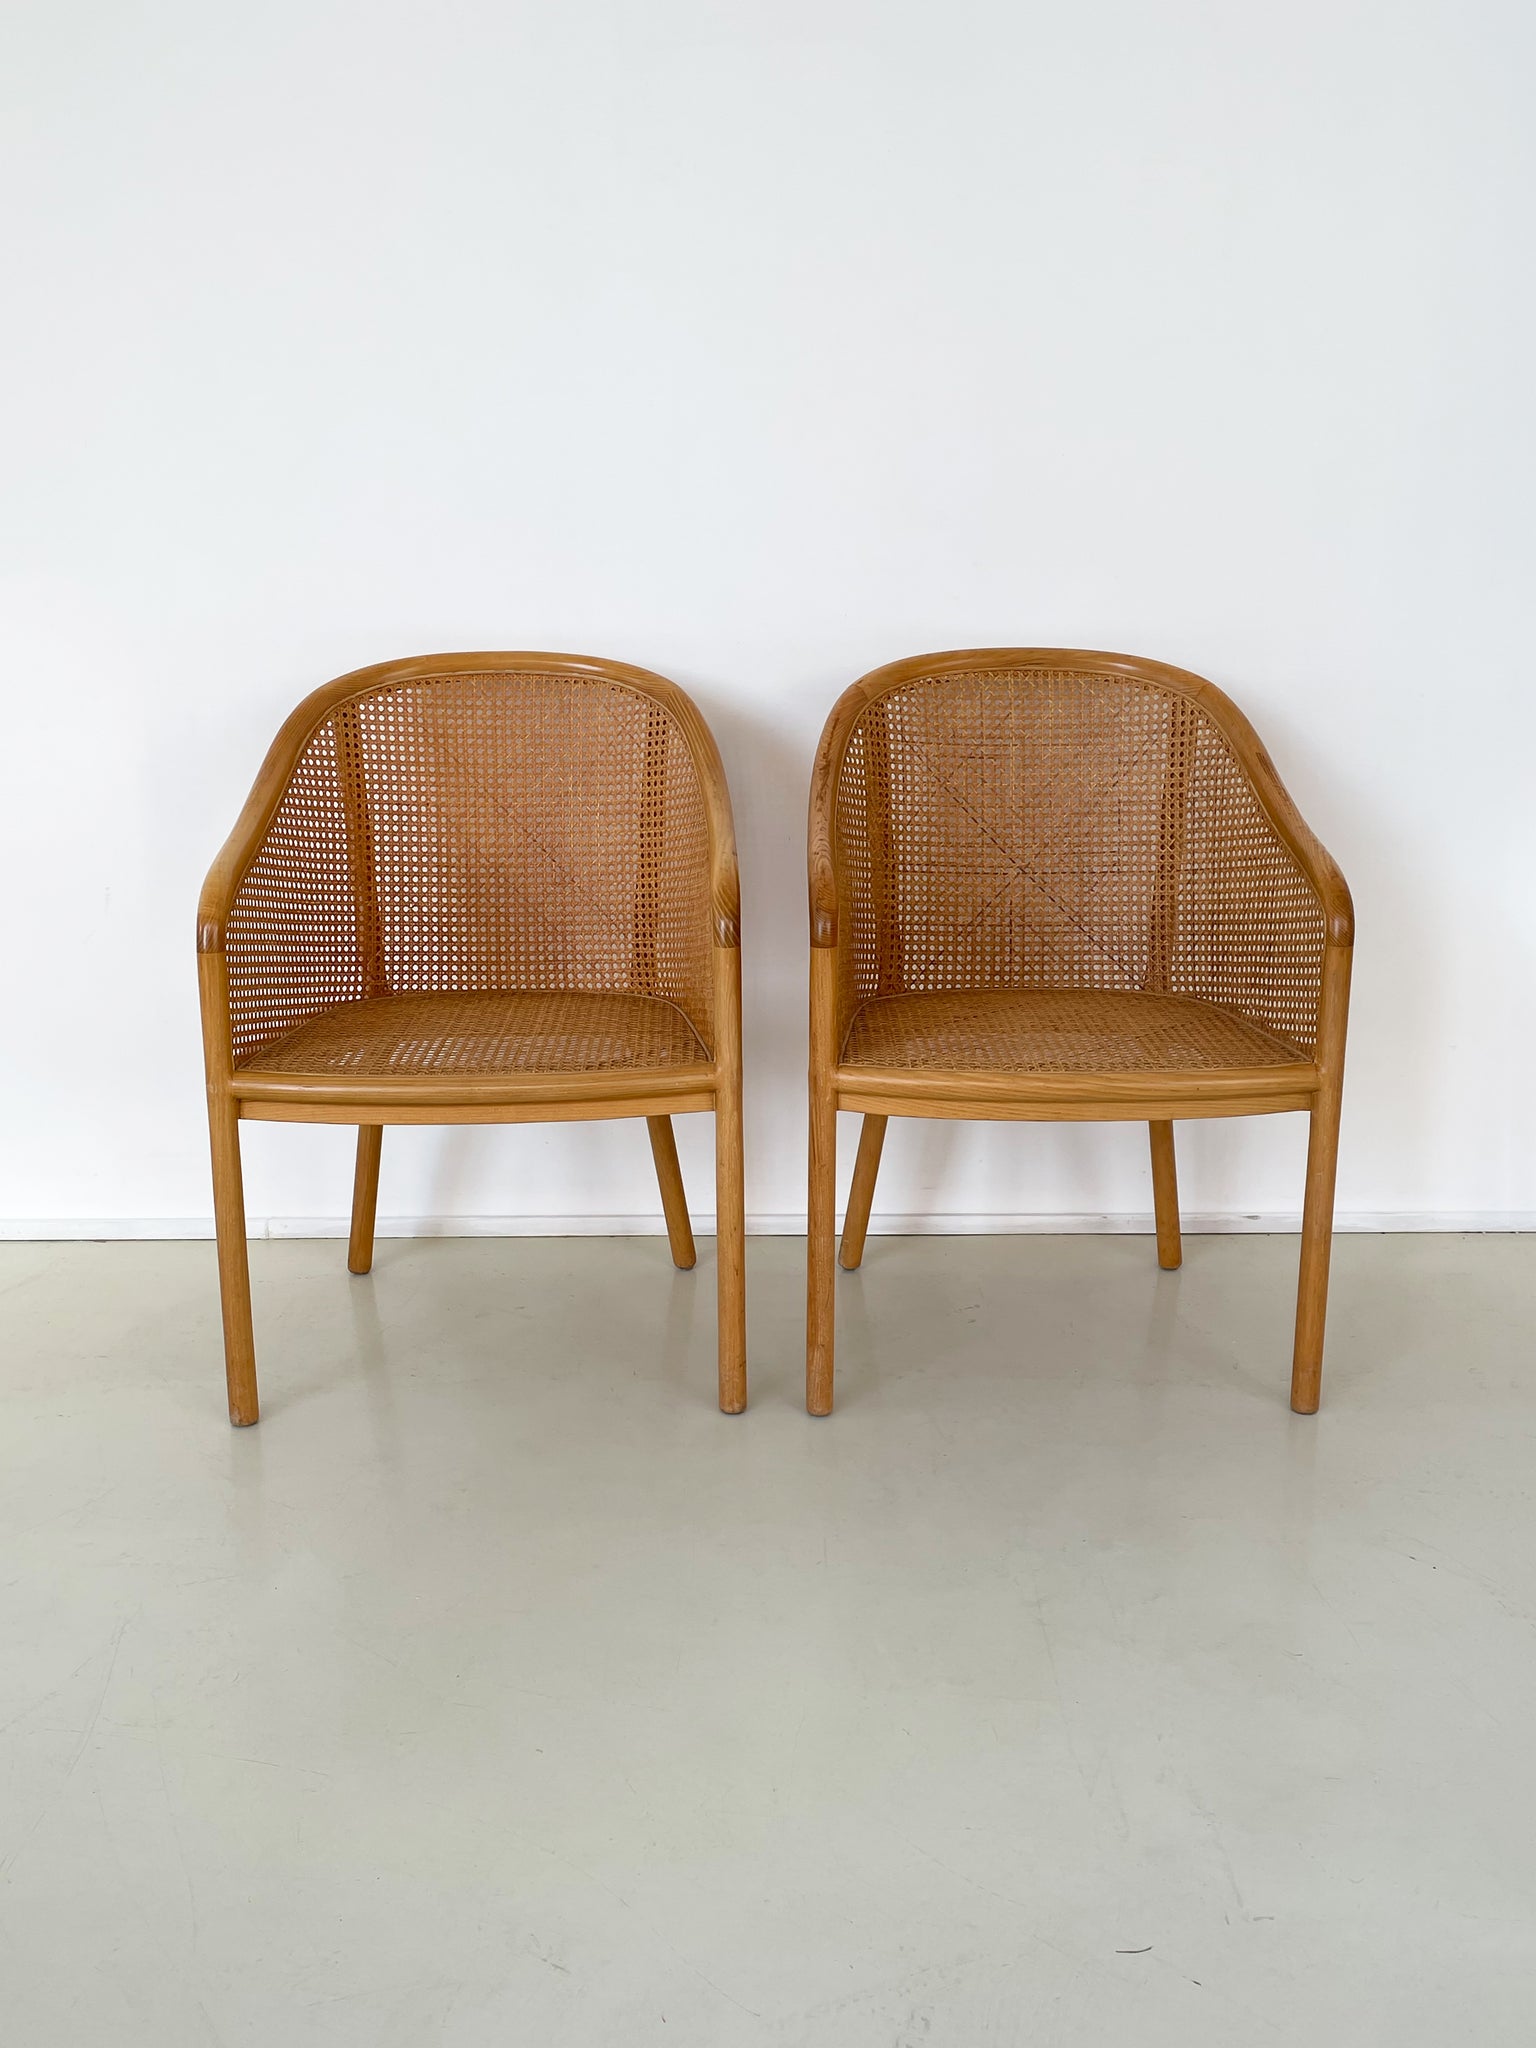 1970s Cane and Ash Wood Chairs by Ward Bennett for Brickel Associates - Per